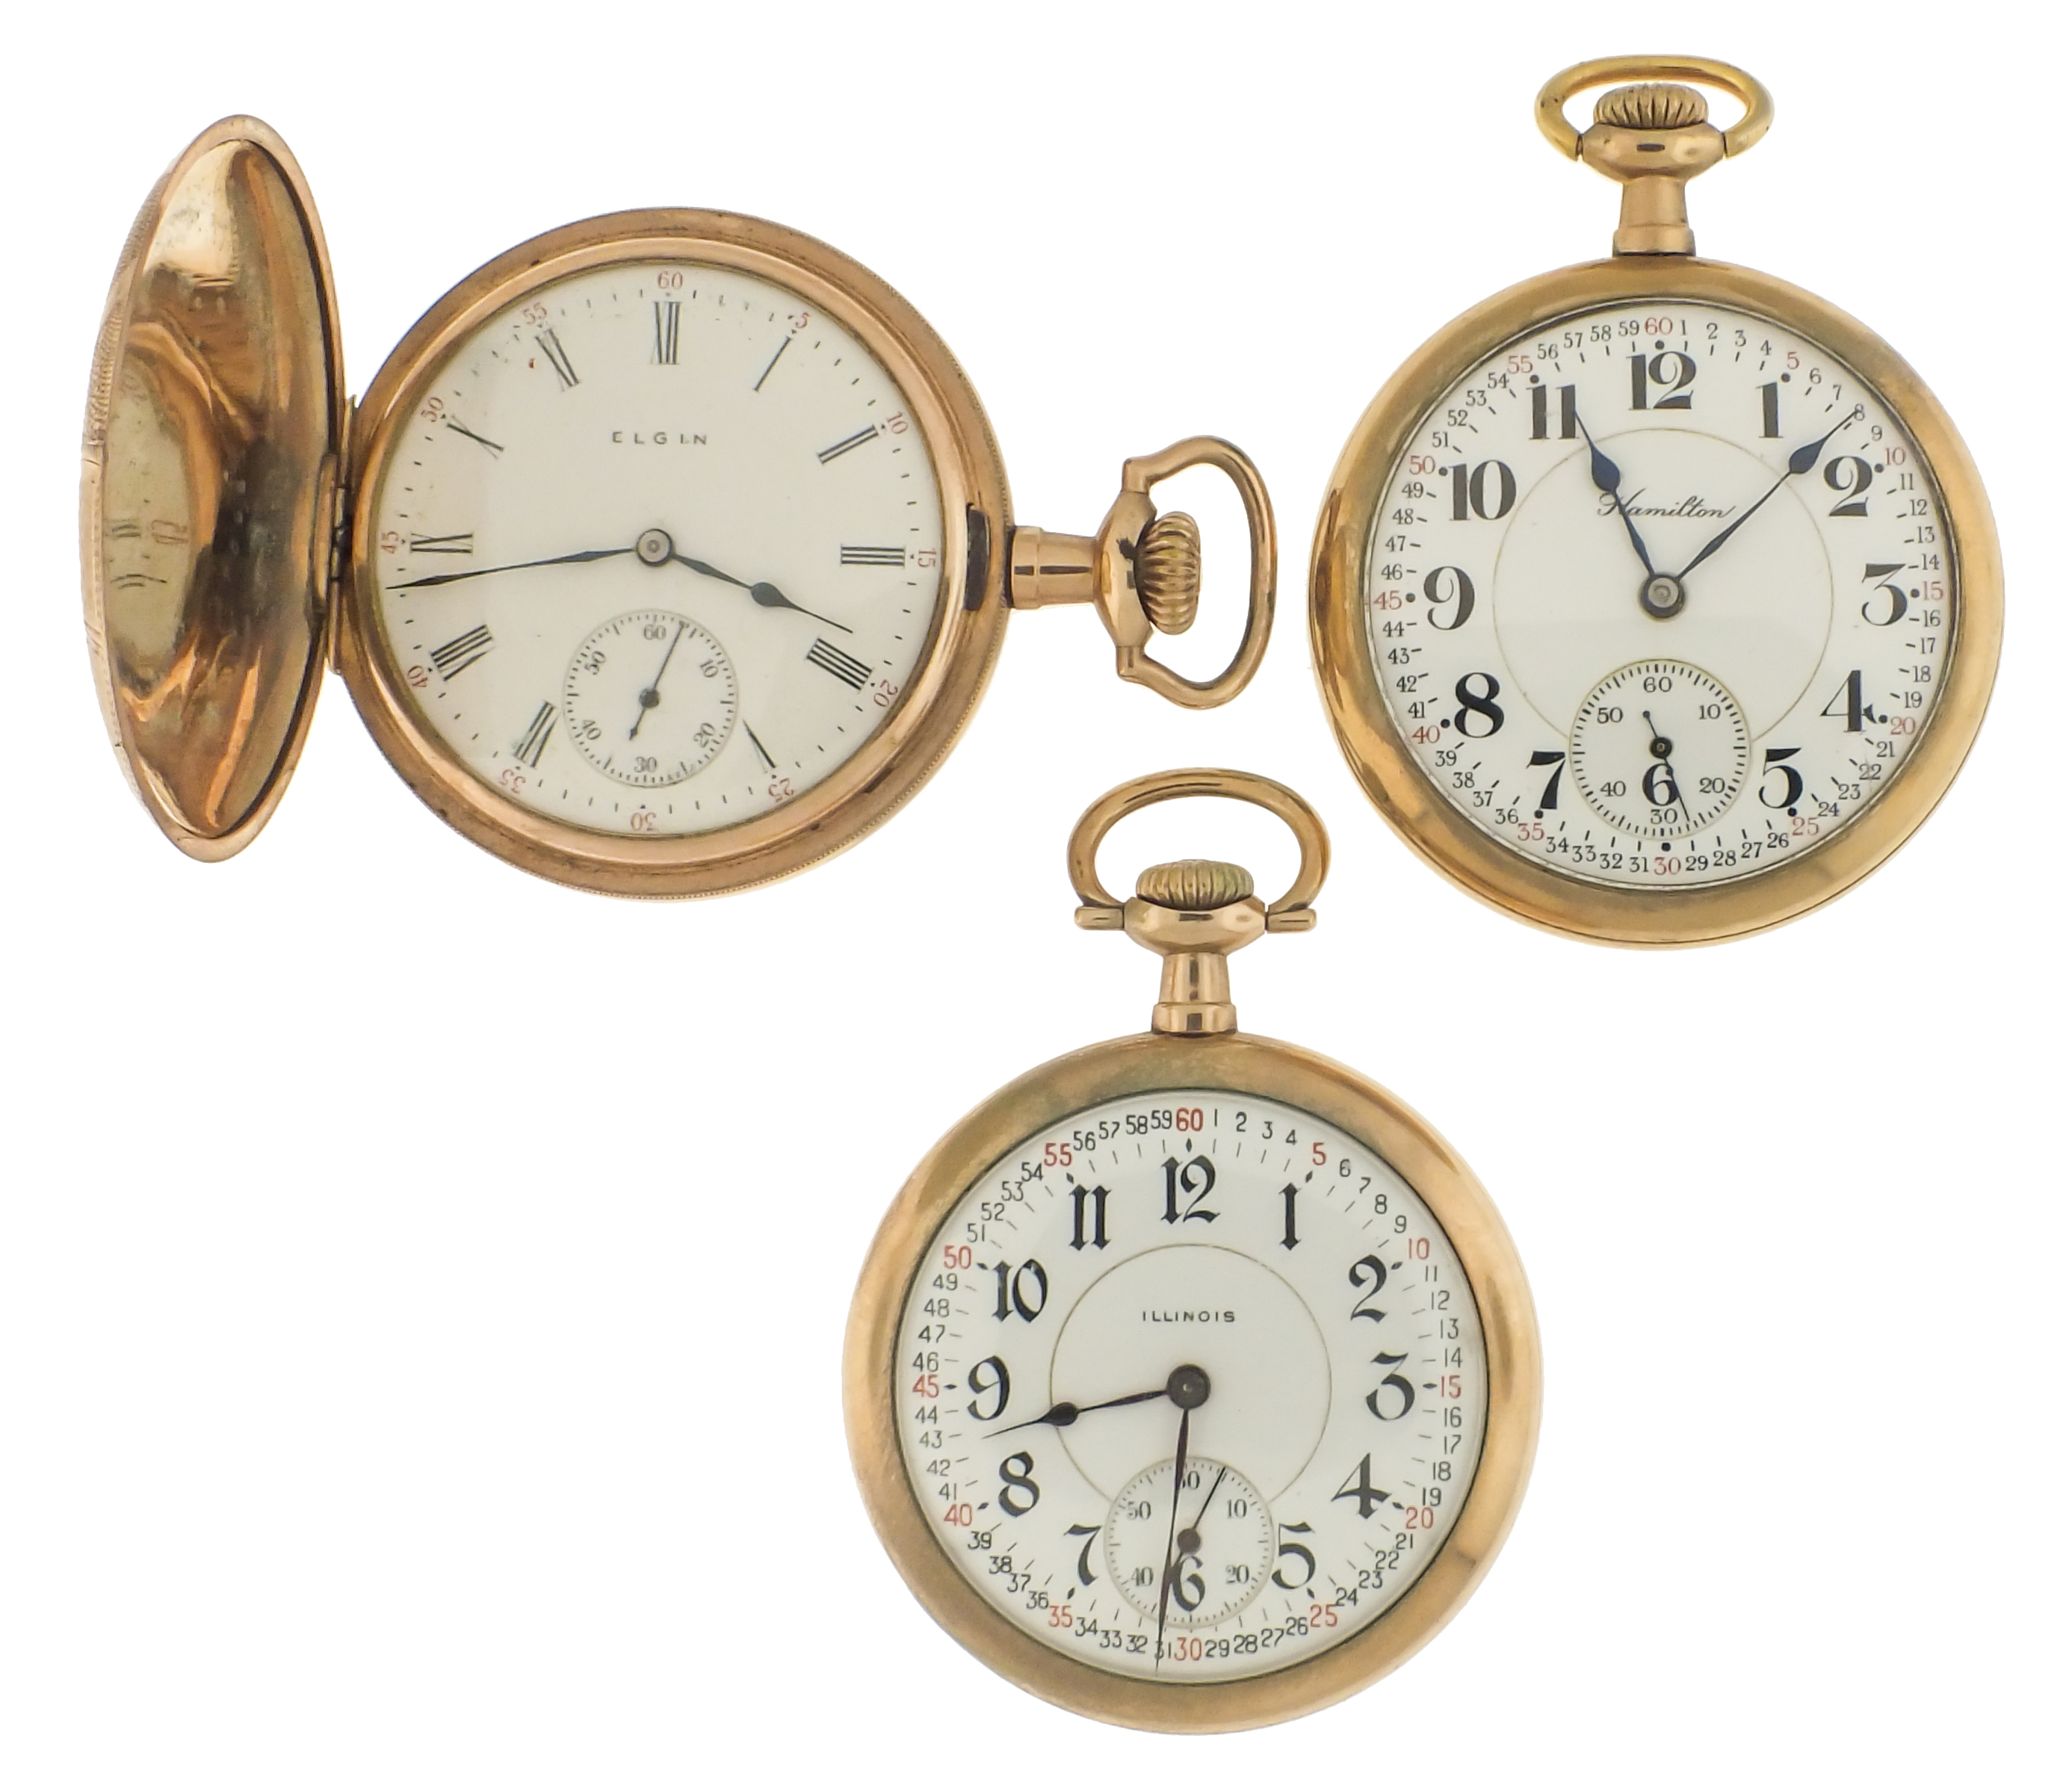 Seven American pocket watches